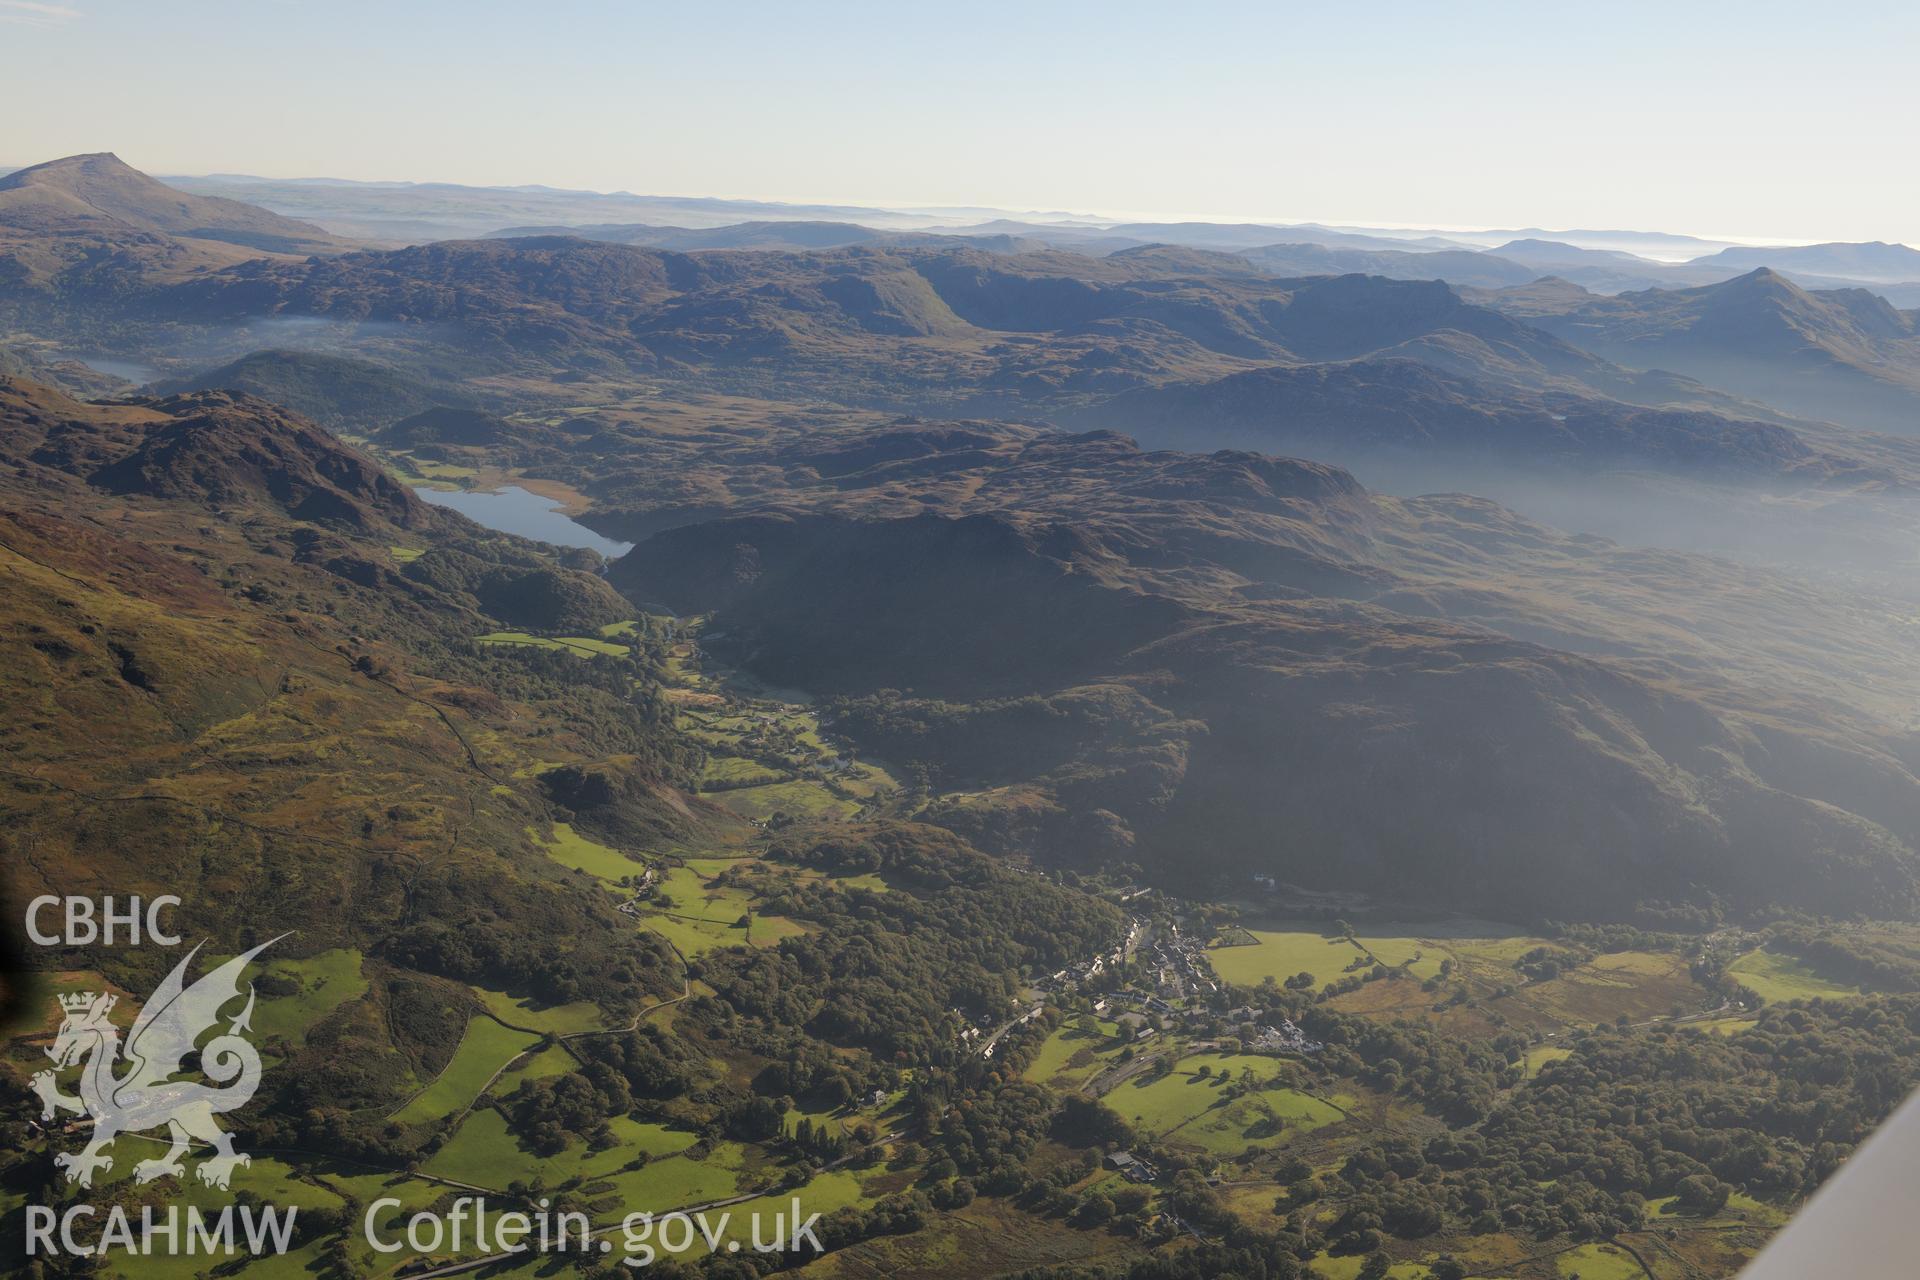 View from the west of Beddgelert, in the Glaslyn valley. Oblique aerial photograph taken during the Royal Commission's programme of archaeological aerial reconnaissance by Toby Driver on 2nd October 2015.